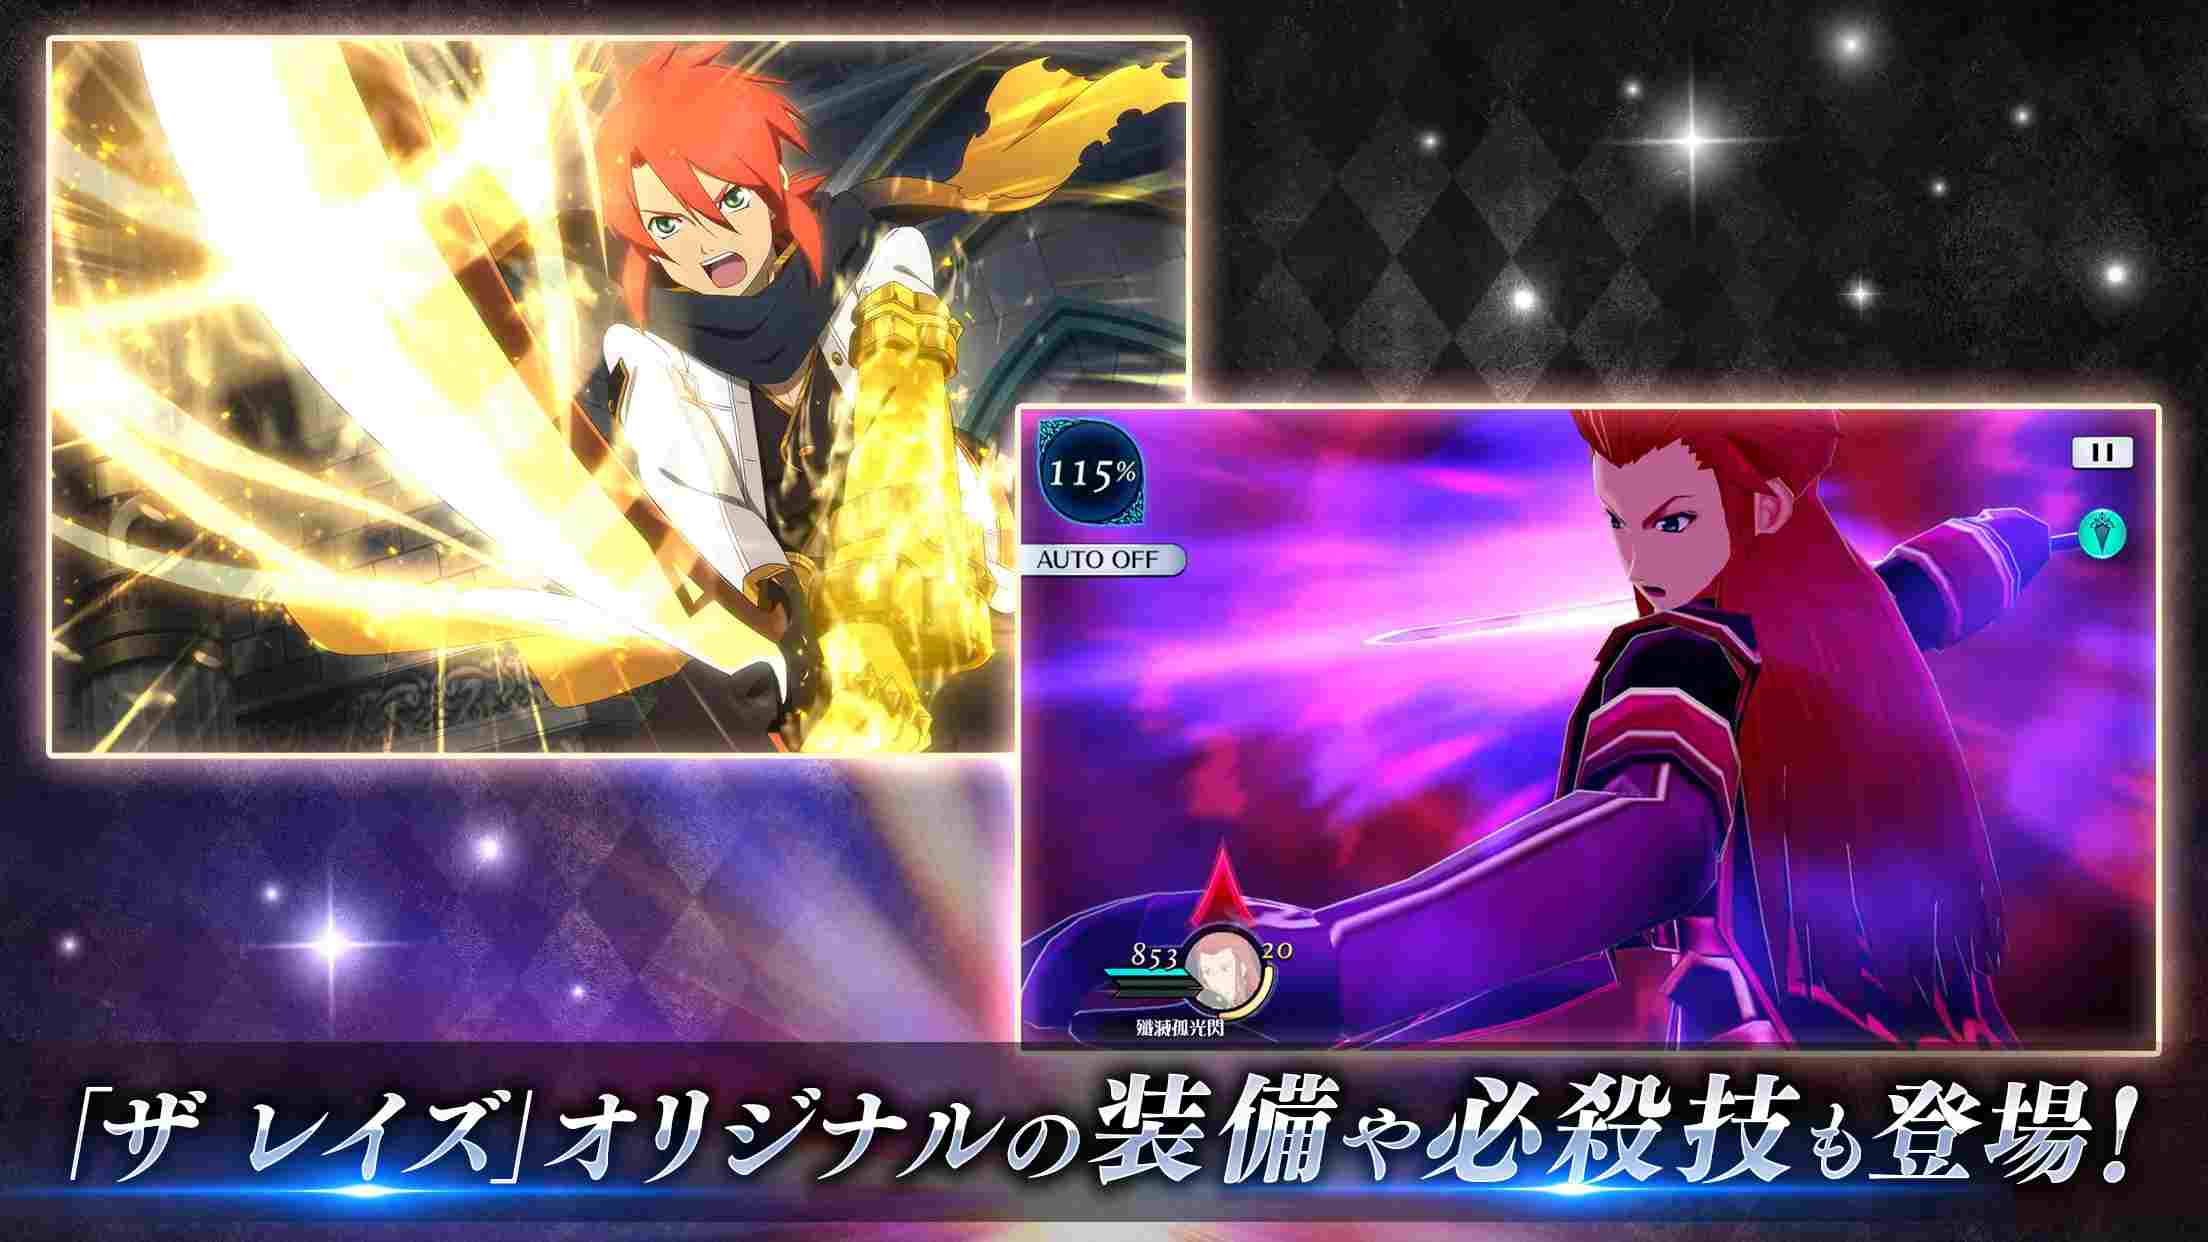 Tales of the Rays MOD APK